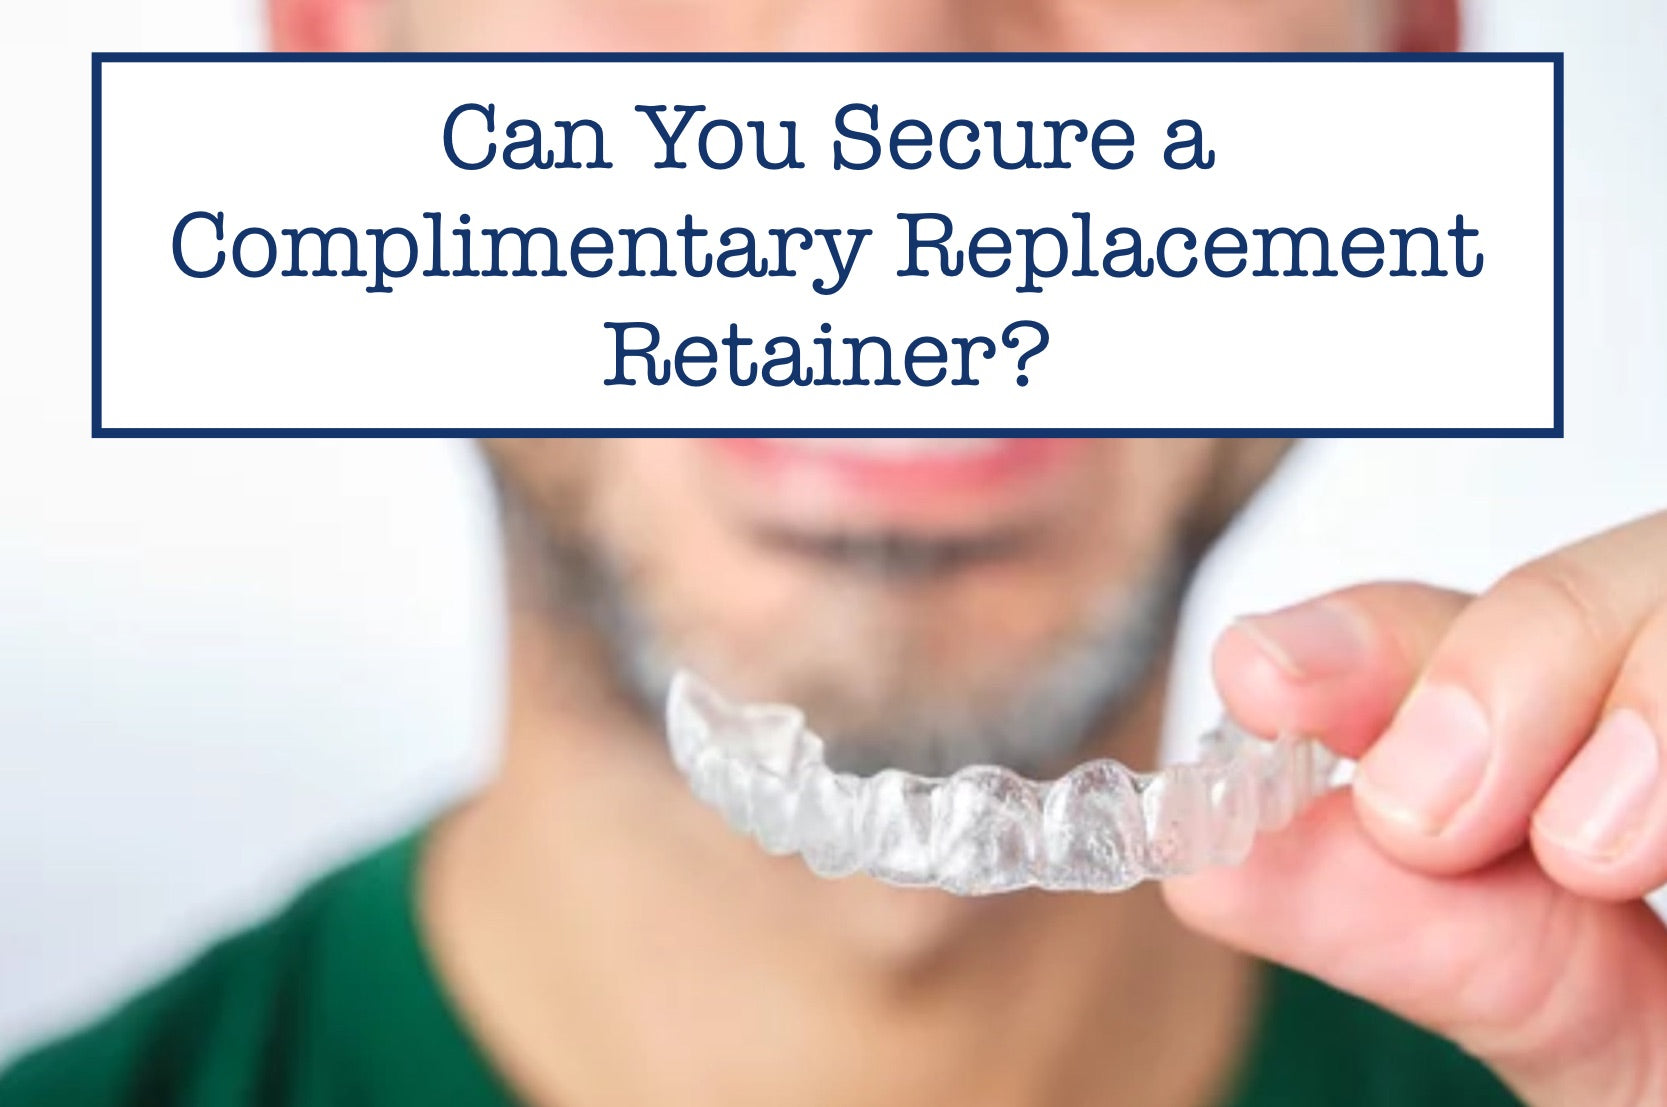 Can You Secure a Complimentary Replacement Retainer?